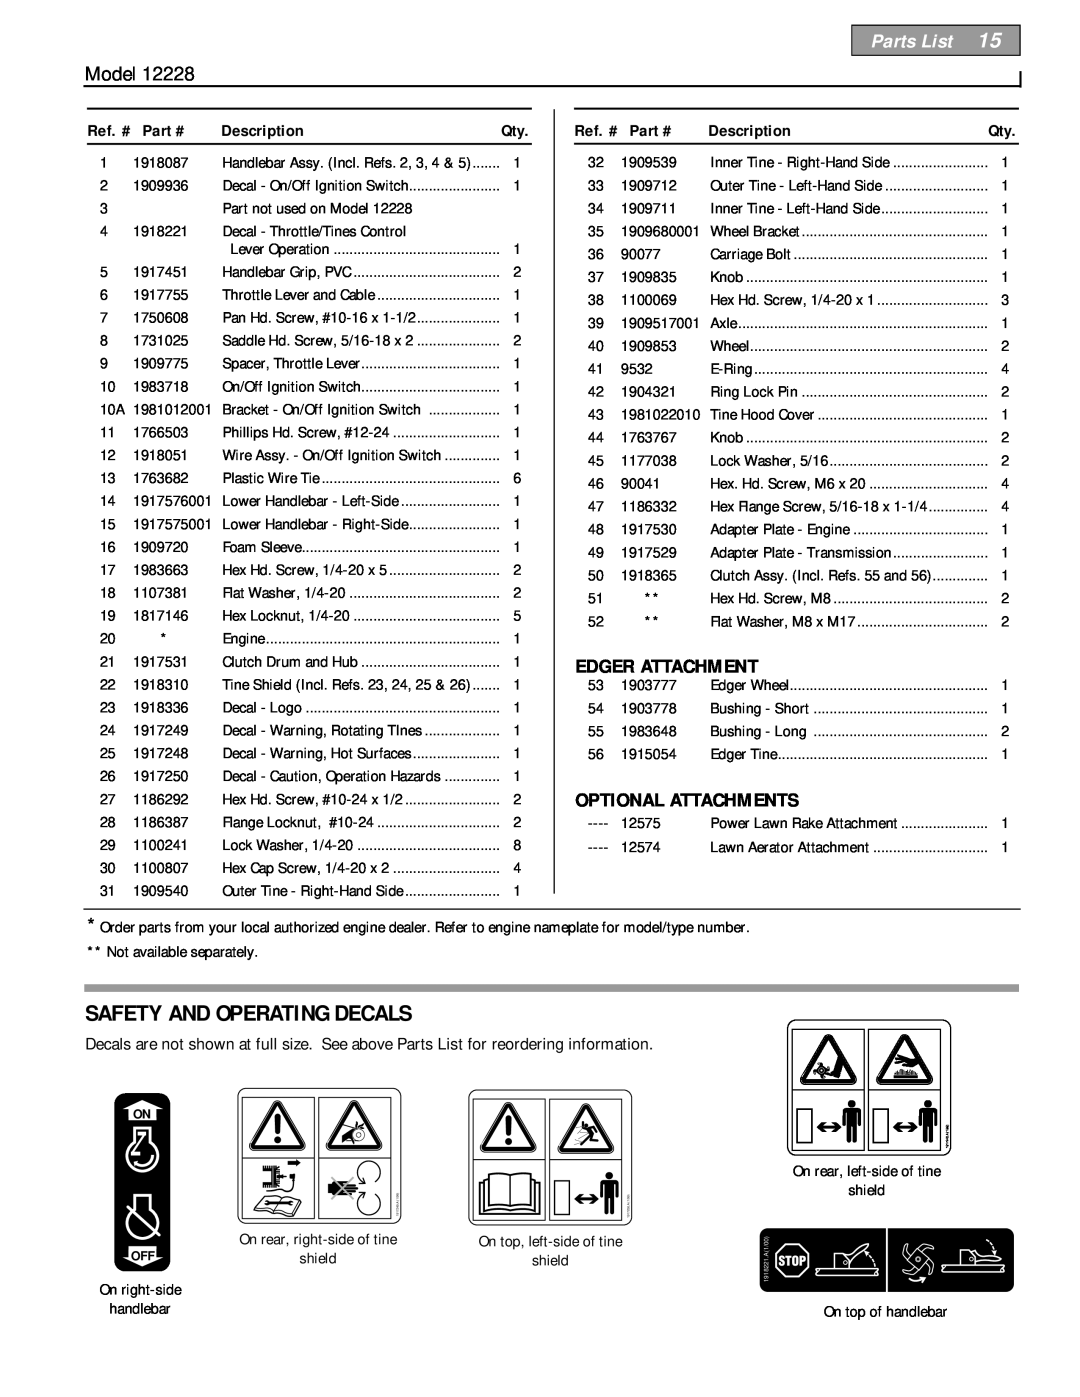 Bolens 12228 owner manual Safety And Operating Decals, Edger Attachment, Optional Attachments, Parts List, Model 